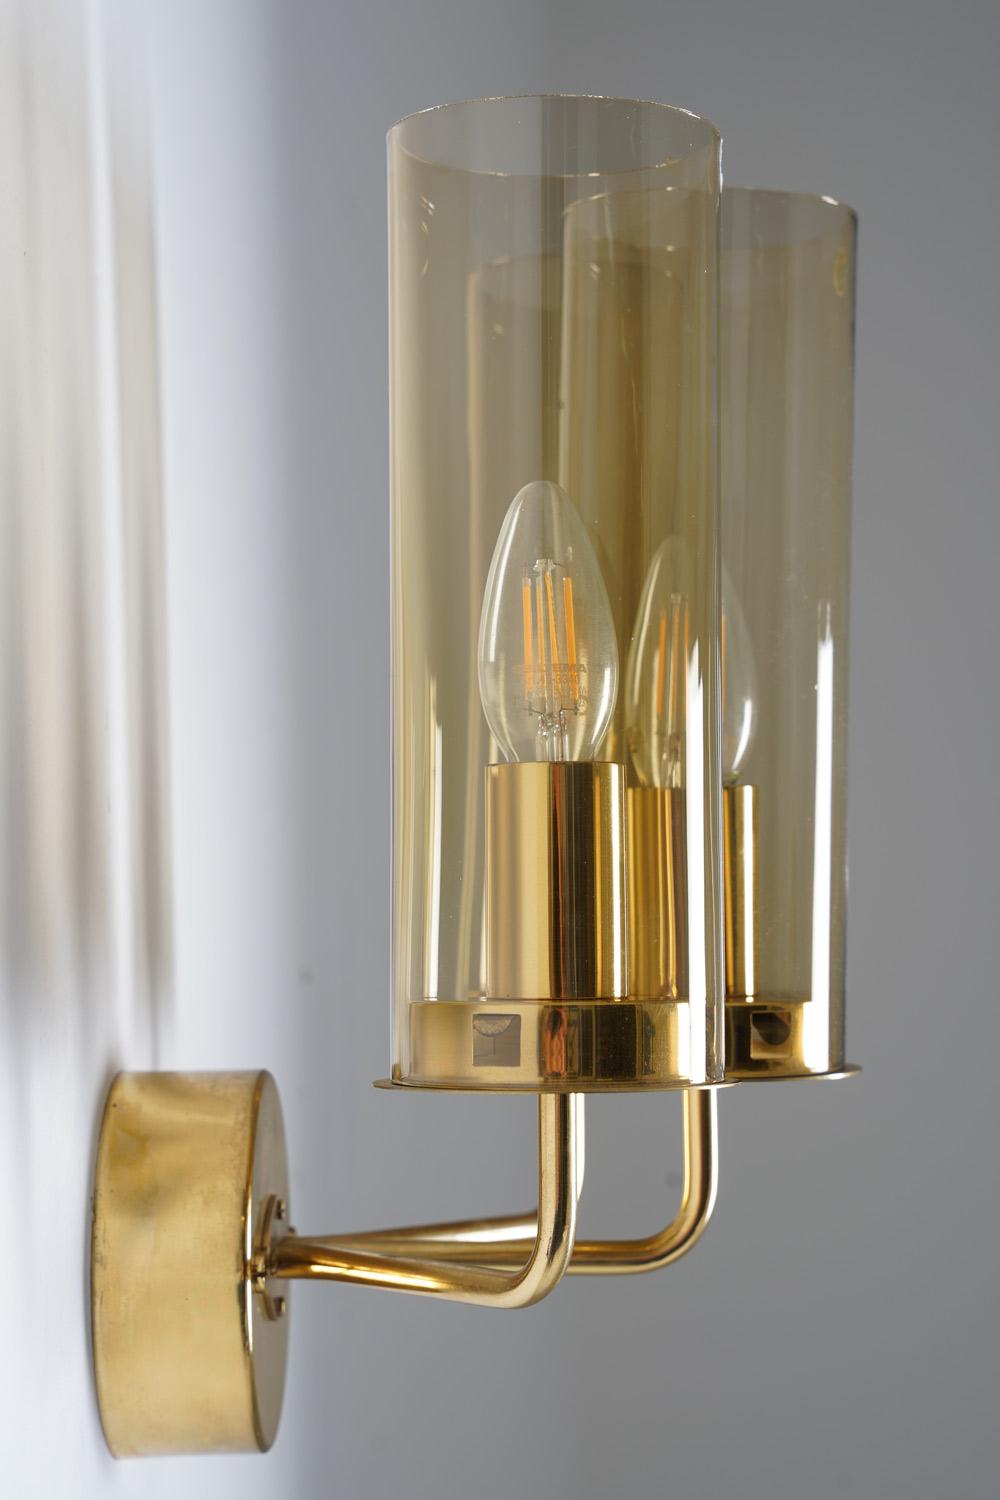 Swedish Midcentury Wall Lamps in Brass and Glass by Hans-Agne Jakobsson In Good Condition For Sale In Karlstad, SE